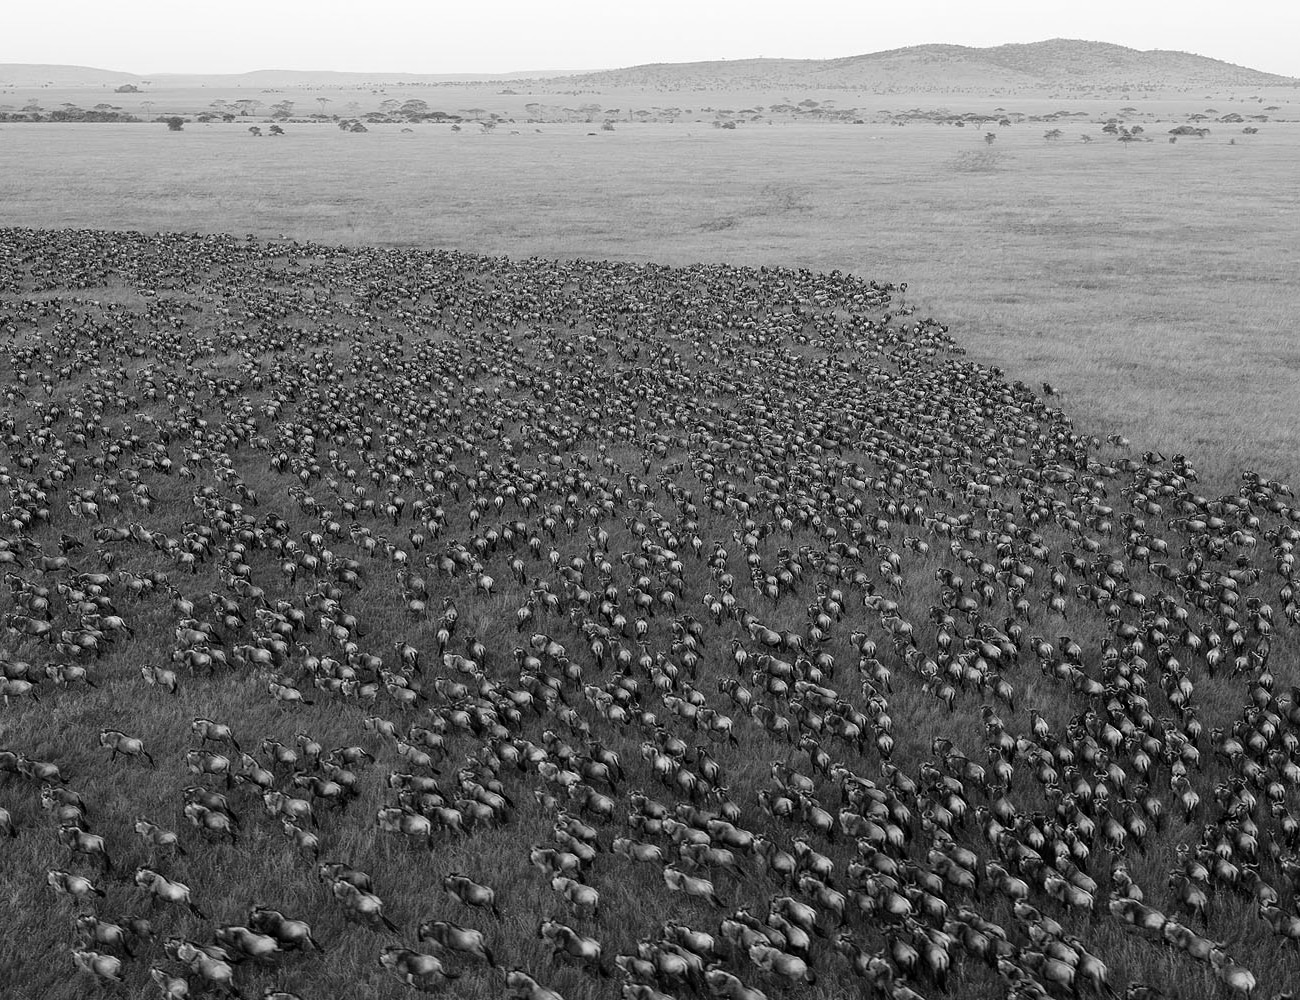 The Great Migration at the Serengeti